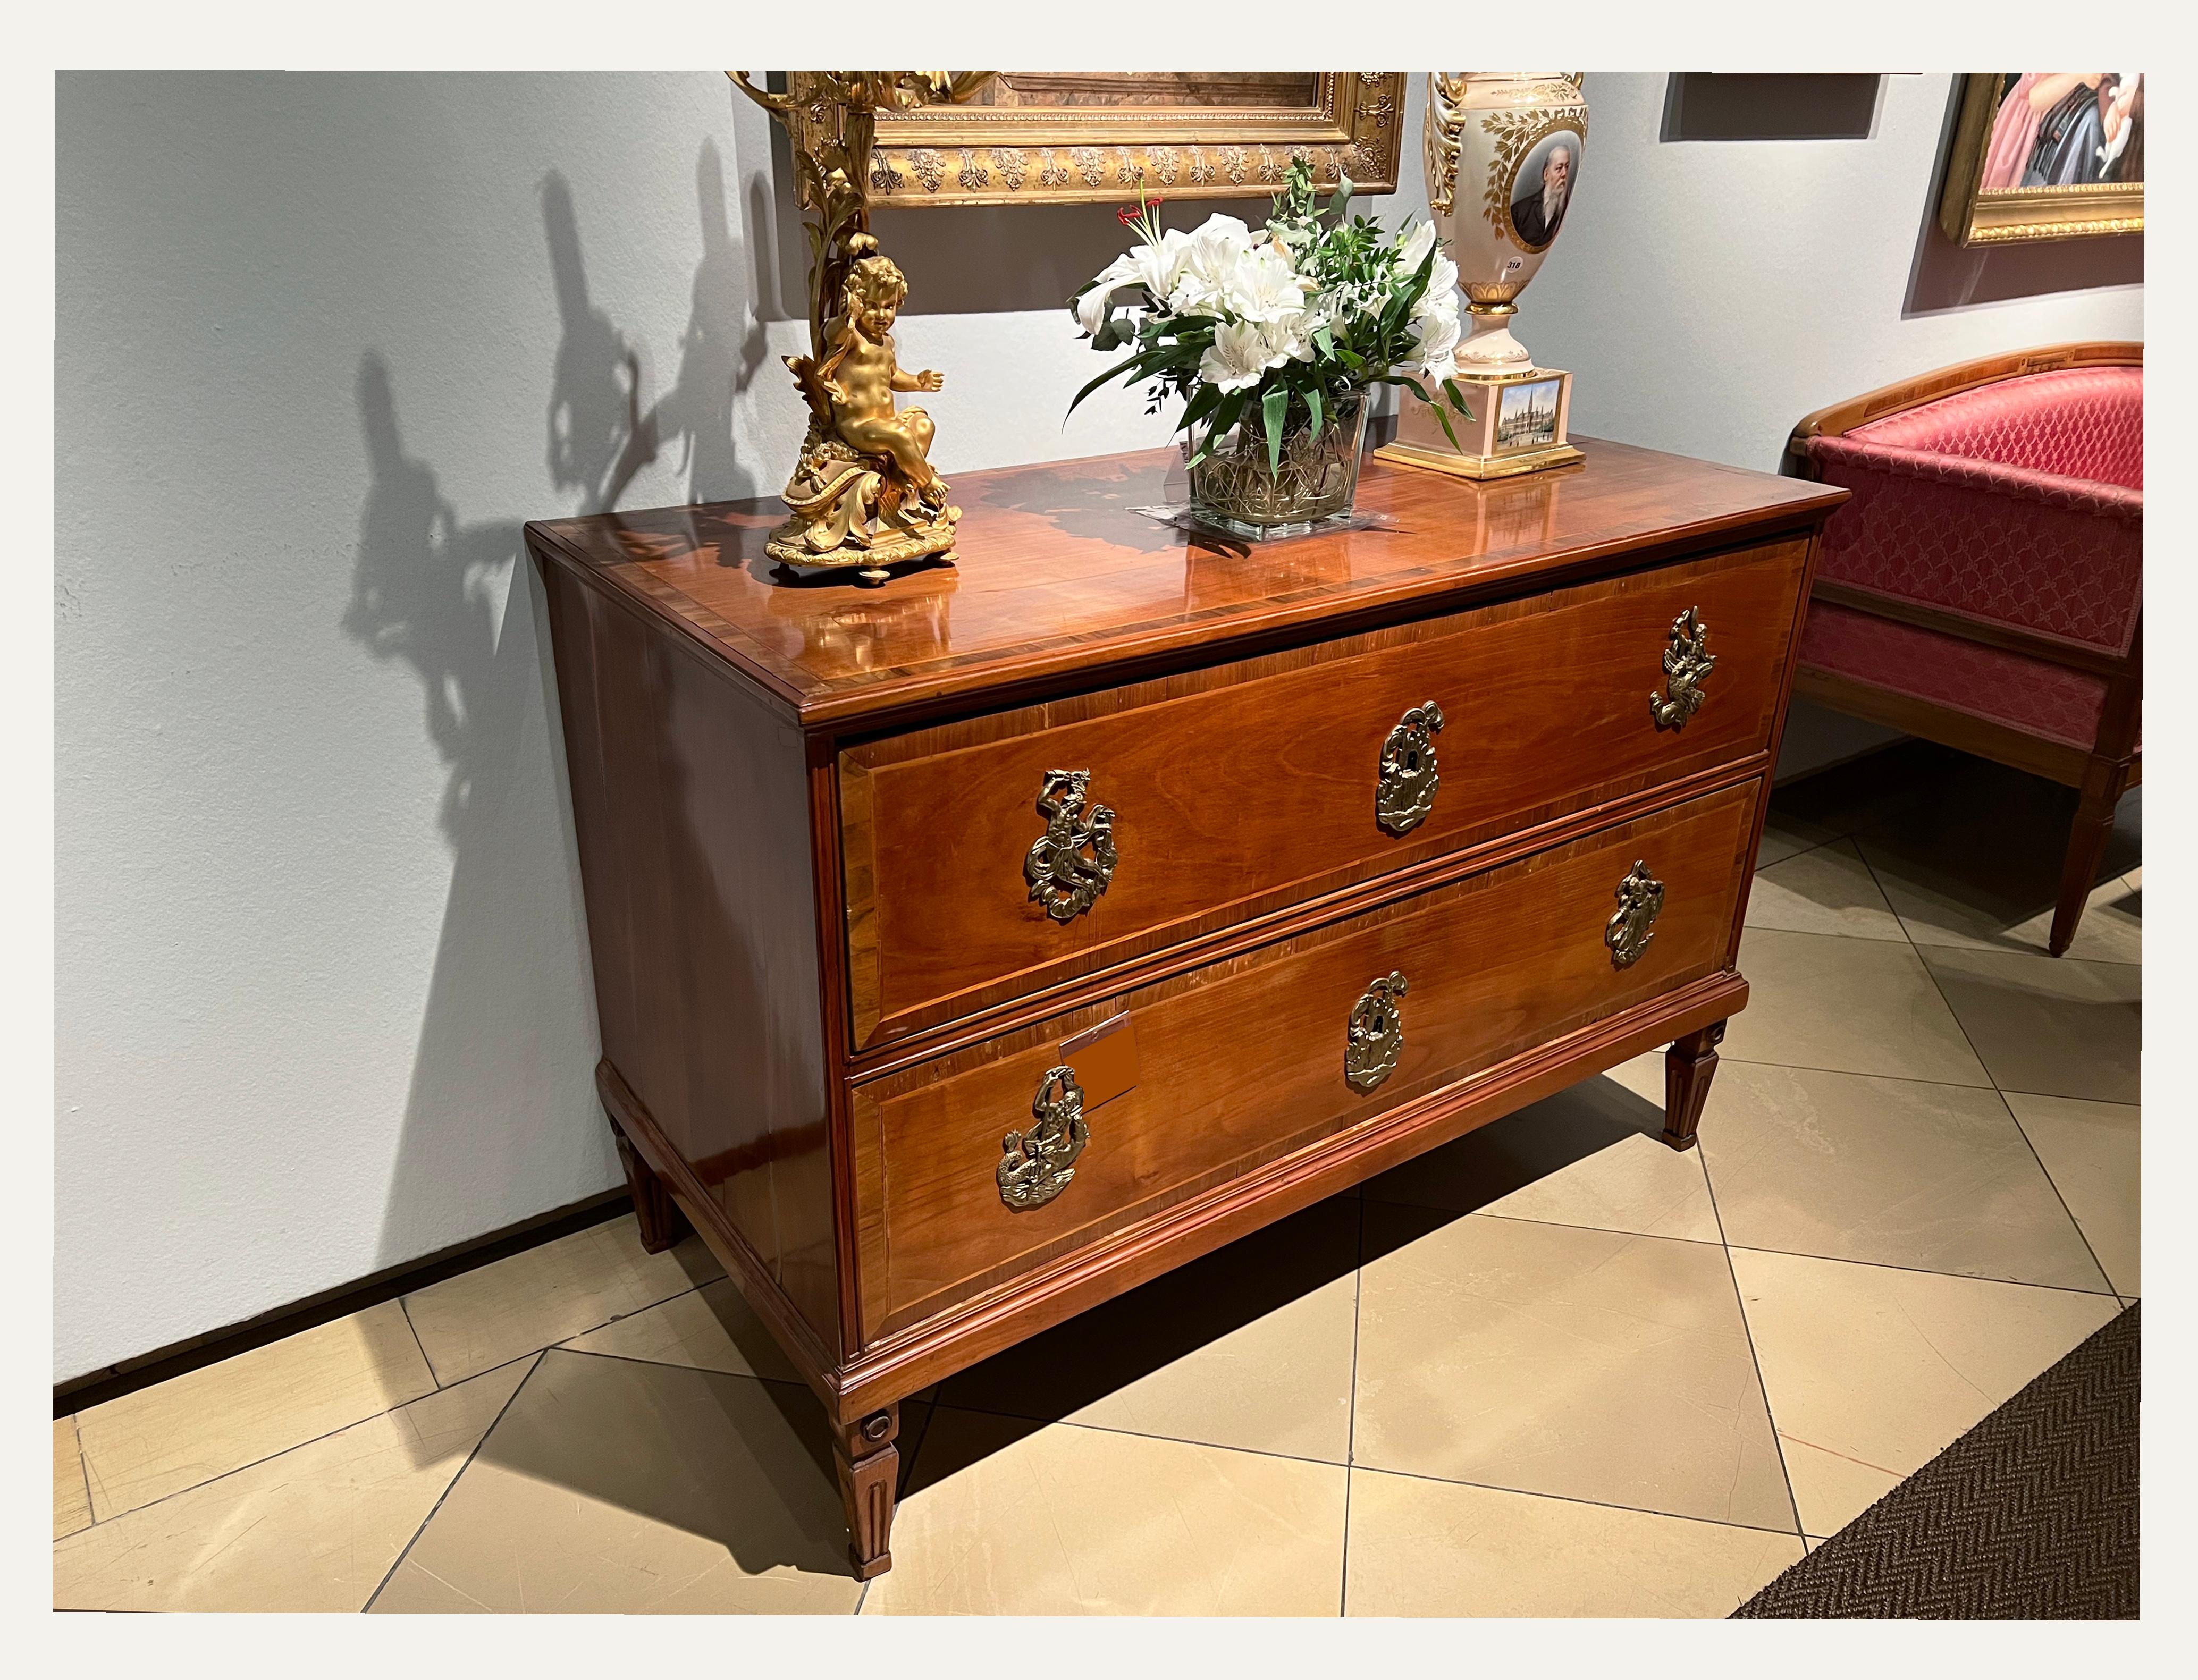 Hello,
This elegant pair of neoclassical commodes is the best example of top-quality Viennese pieces from circa 1800.

Viennese Neoclassical style is distinguished by their sophisticated proportions, rare and refined design and excellent